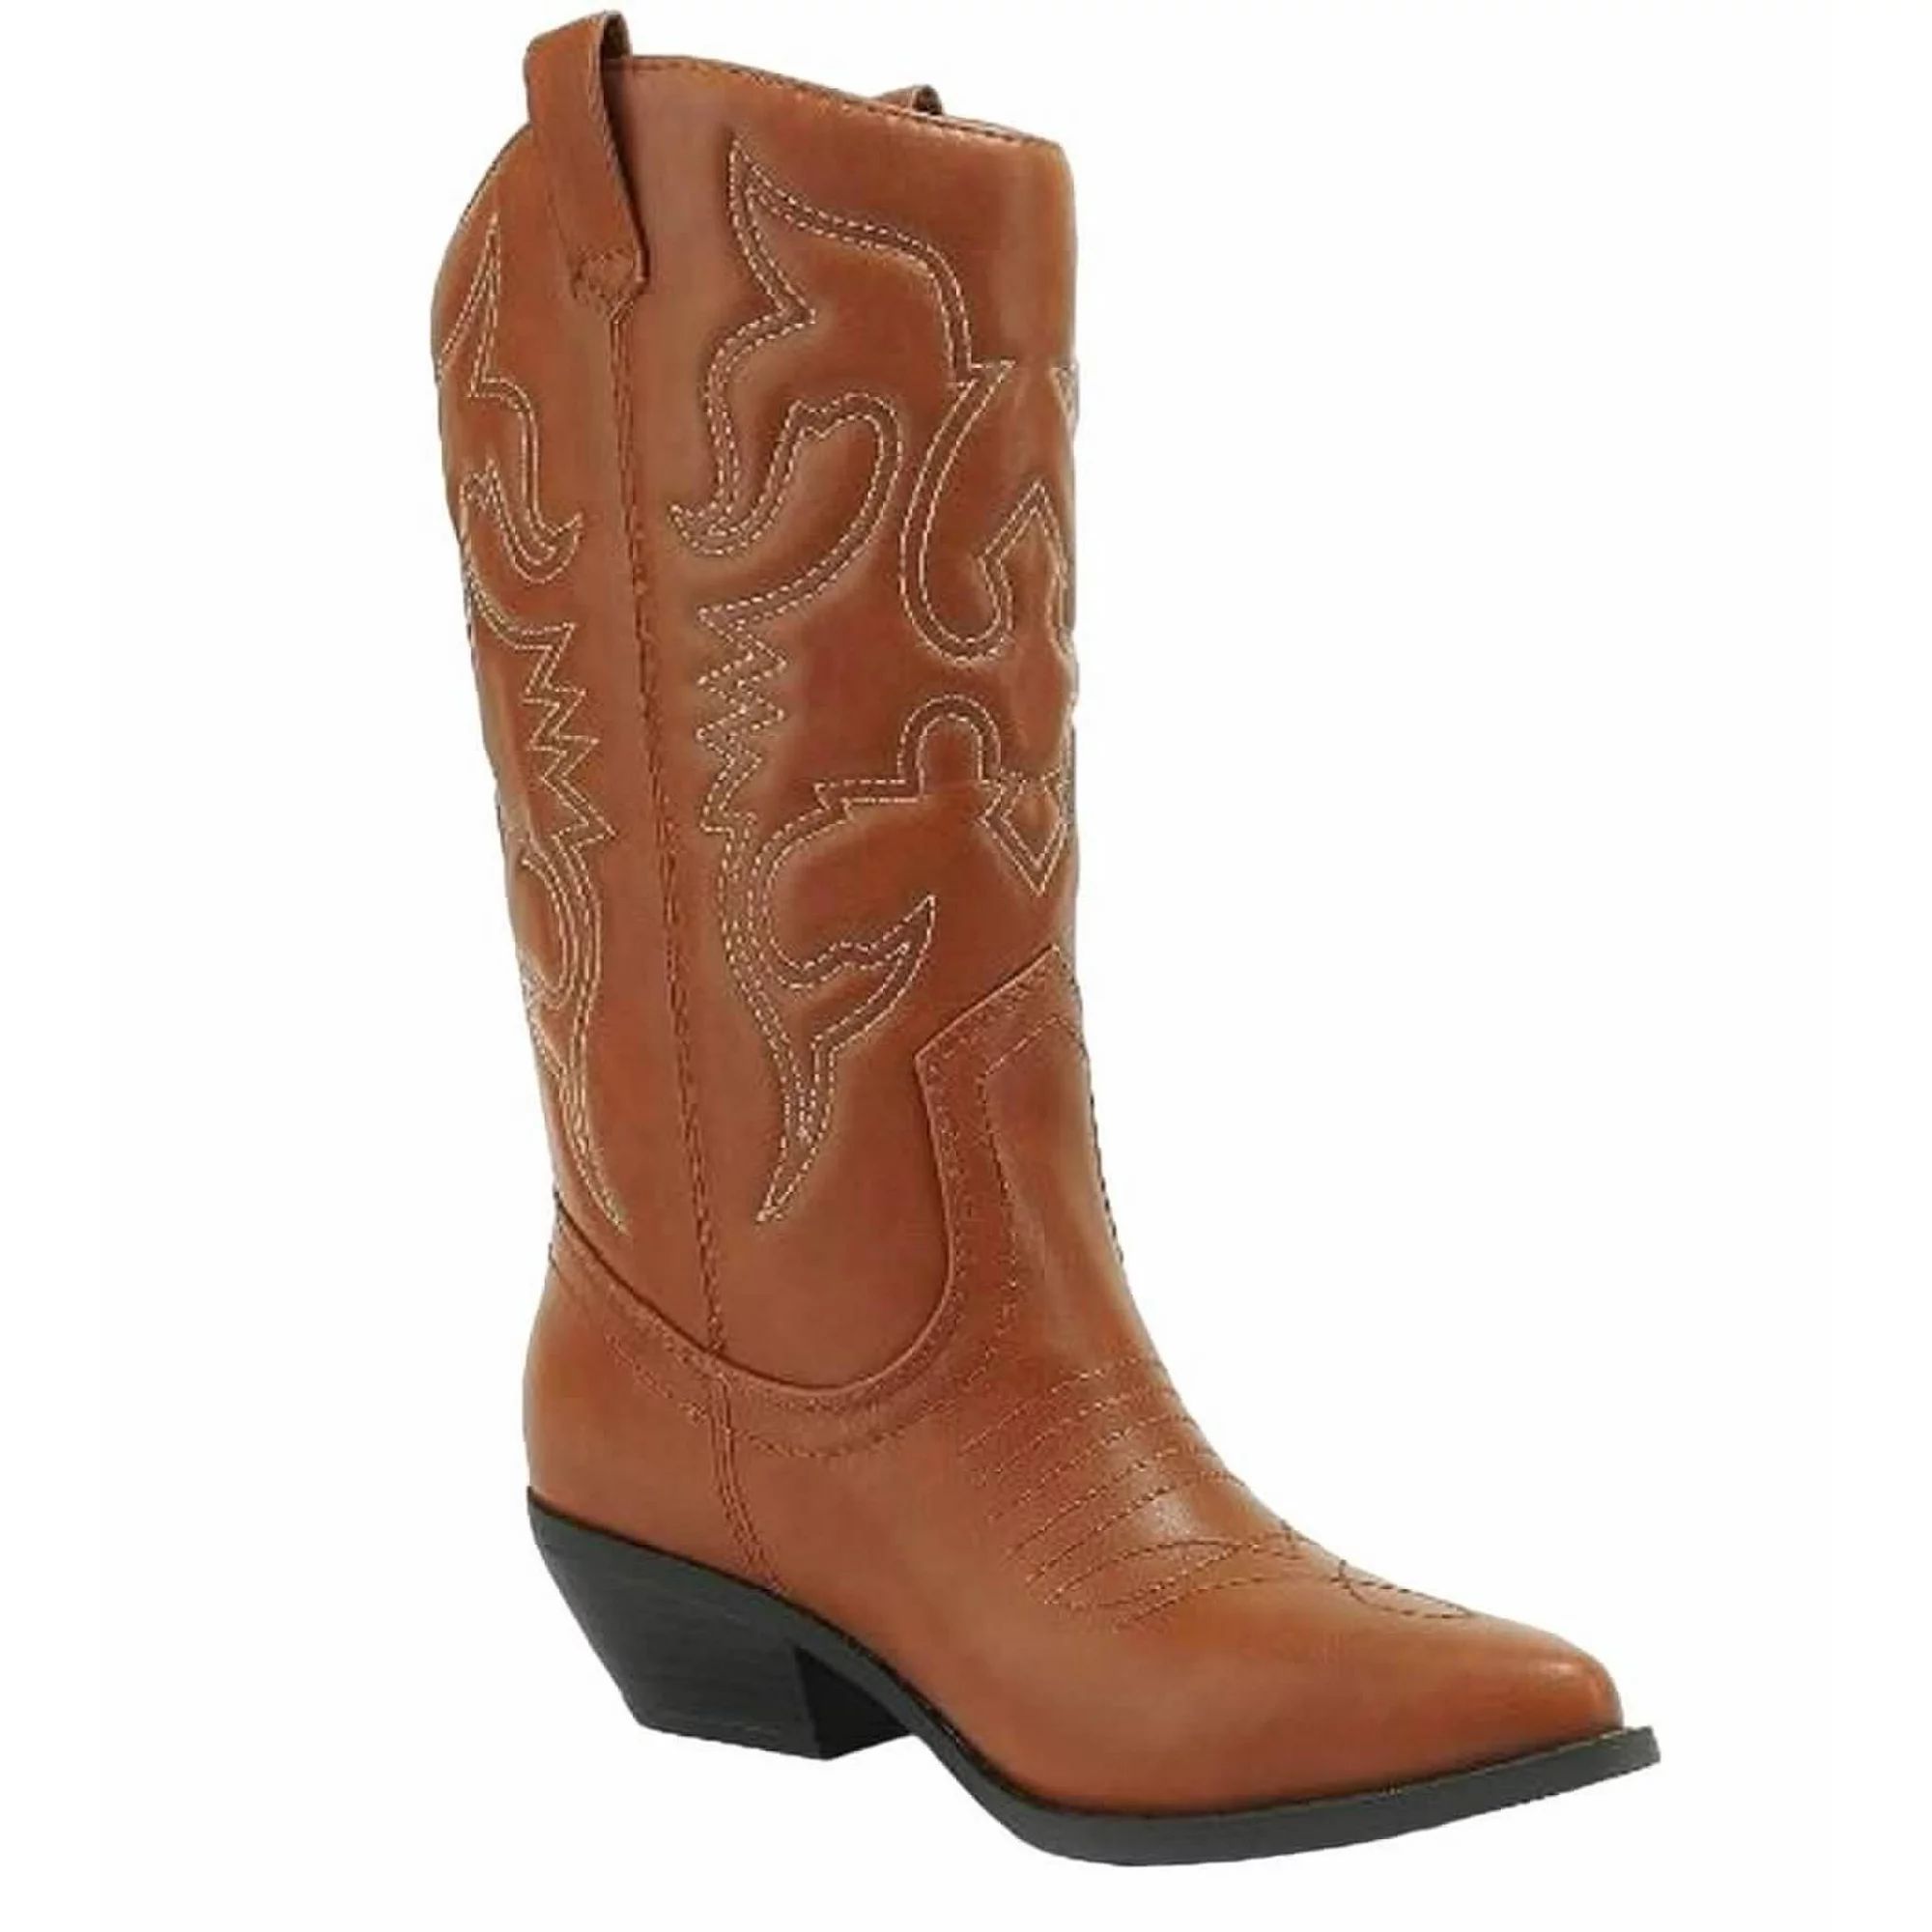 Shoes 18 Womens Faux Leather Western Cowboy Boots W/Traditional Embroidery (8, Cognac 6314 Tall) | Walmart (US)